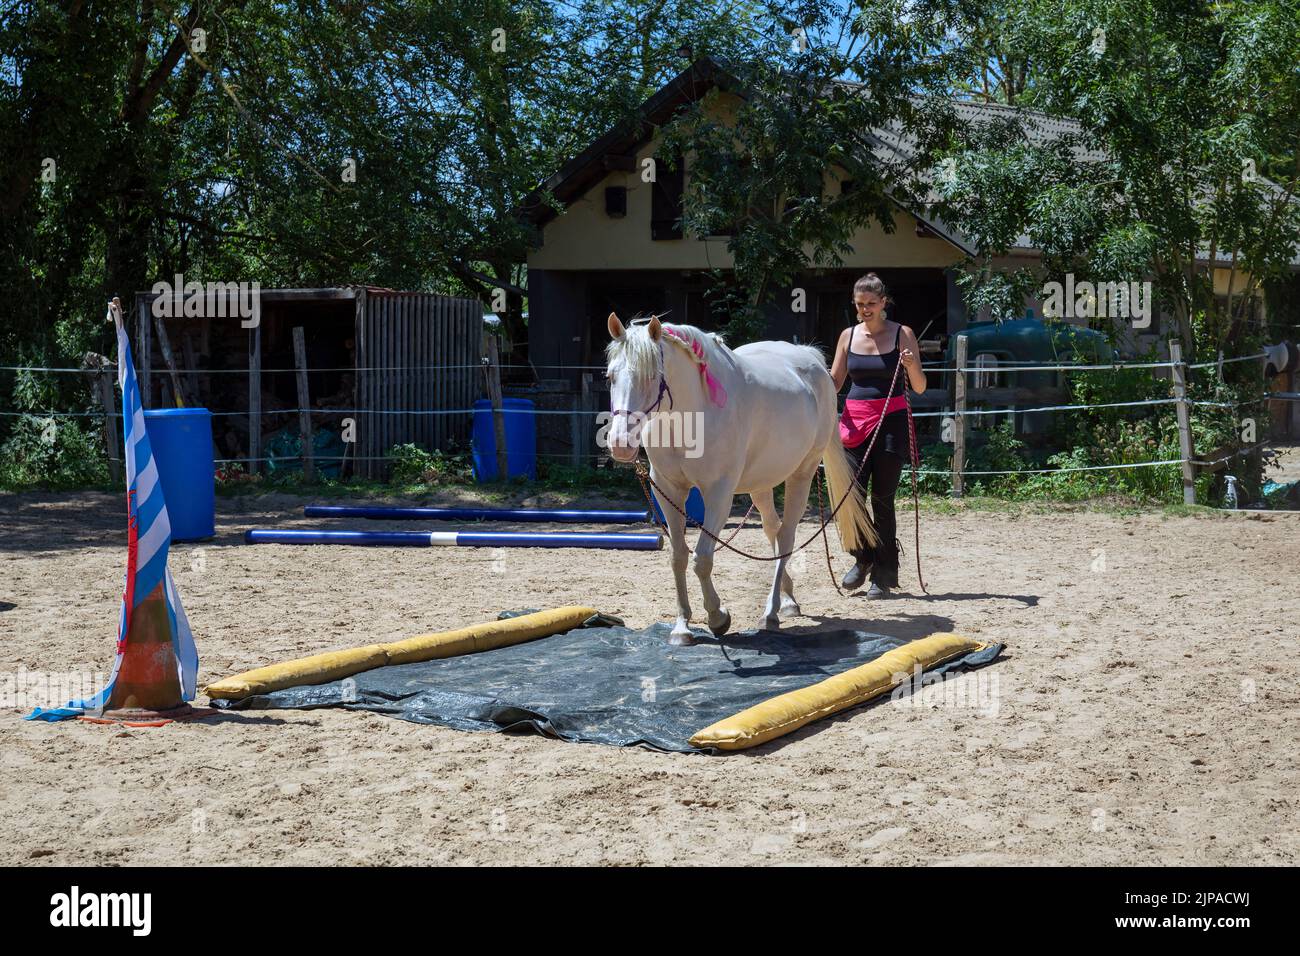 Demonstration of Horse Skills at the Mounted Archery Contest in Limpach, Luxembourg on 2nd July 2022 Stock Photo